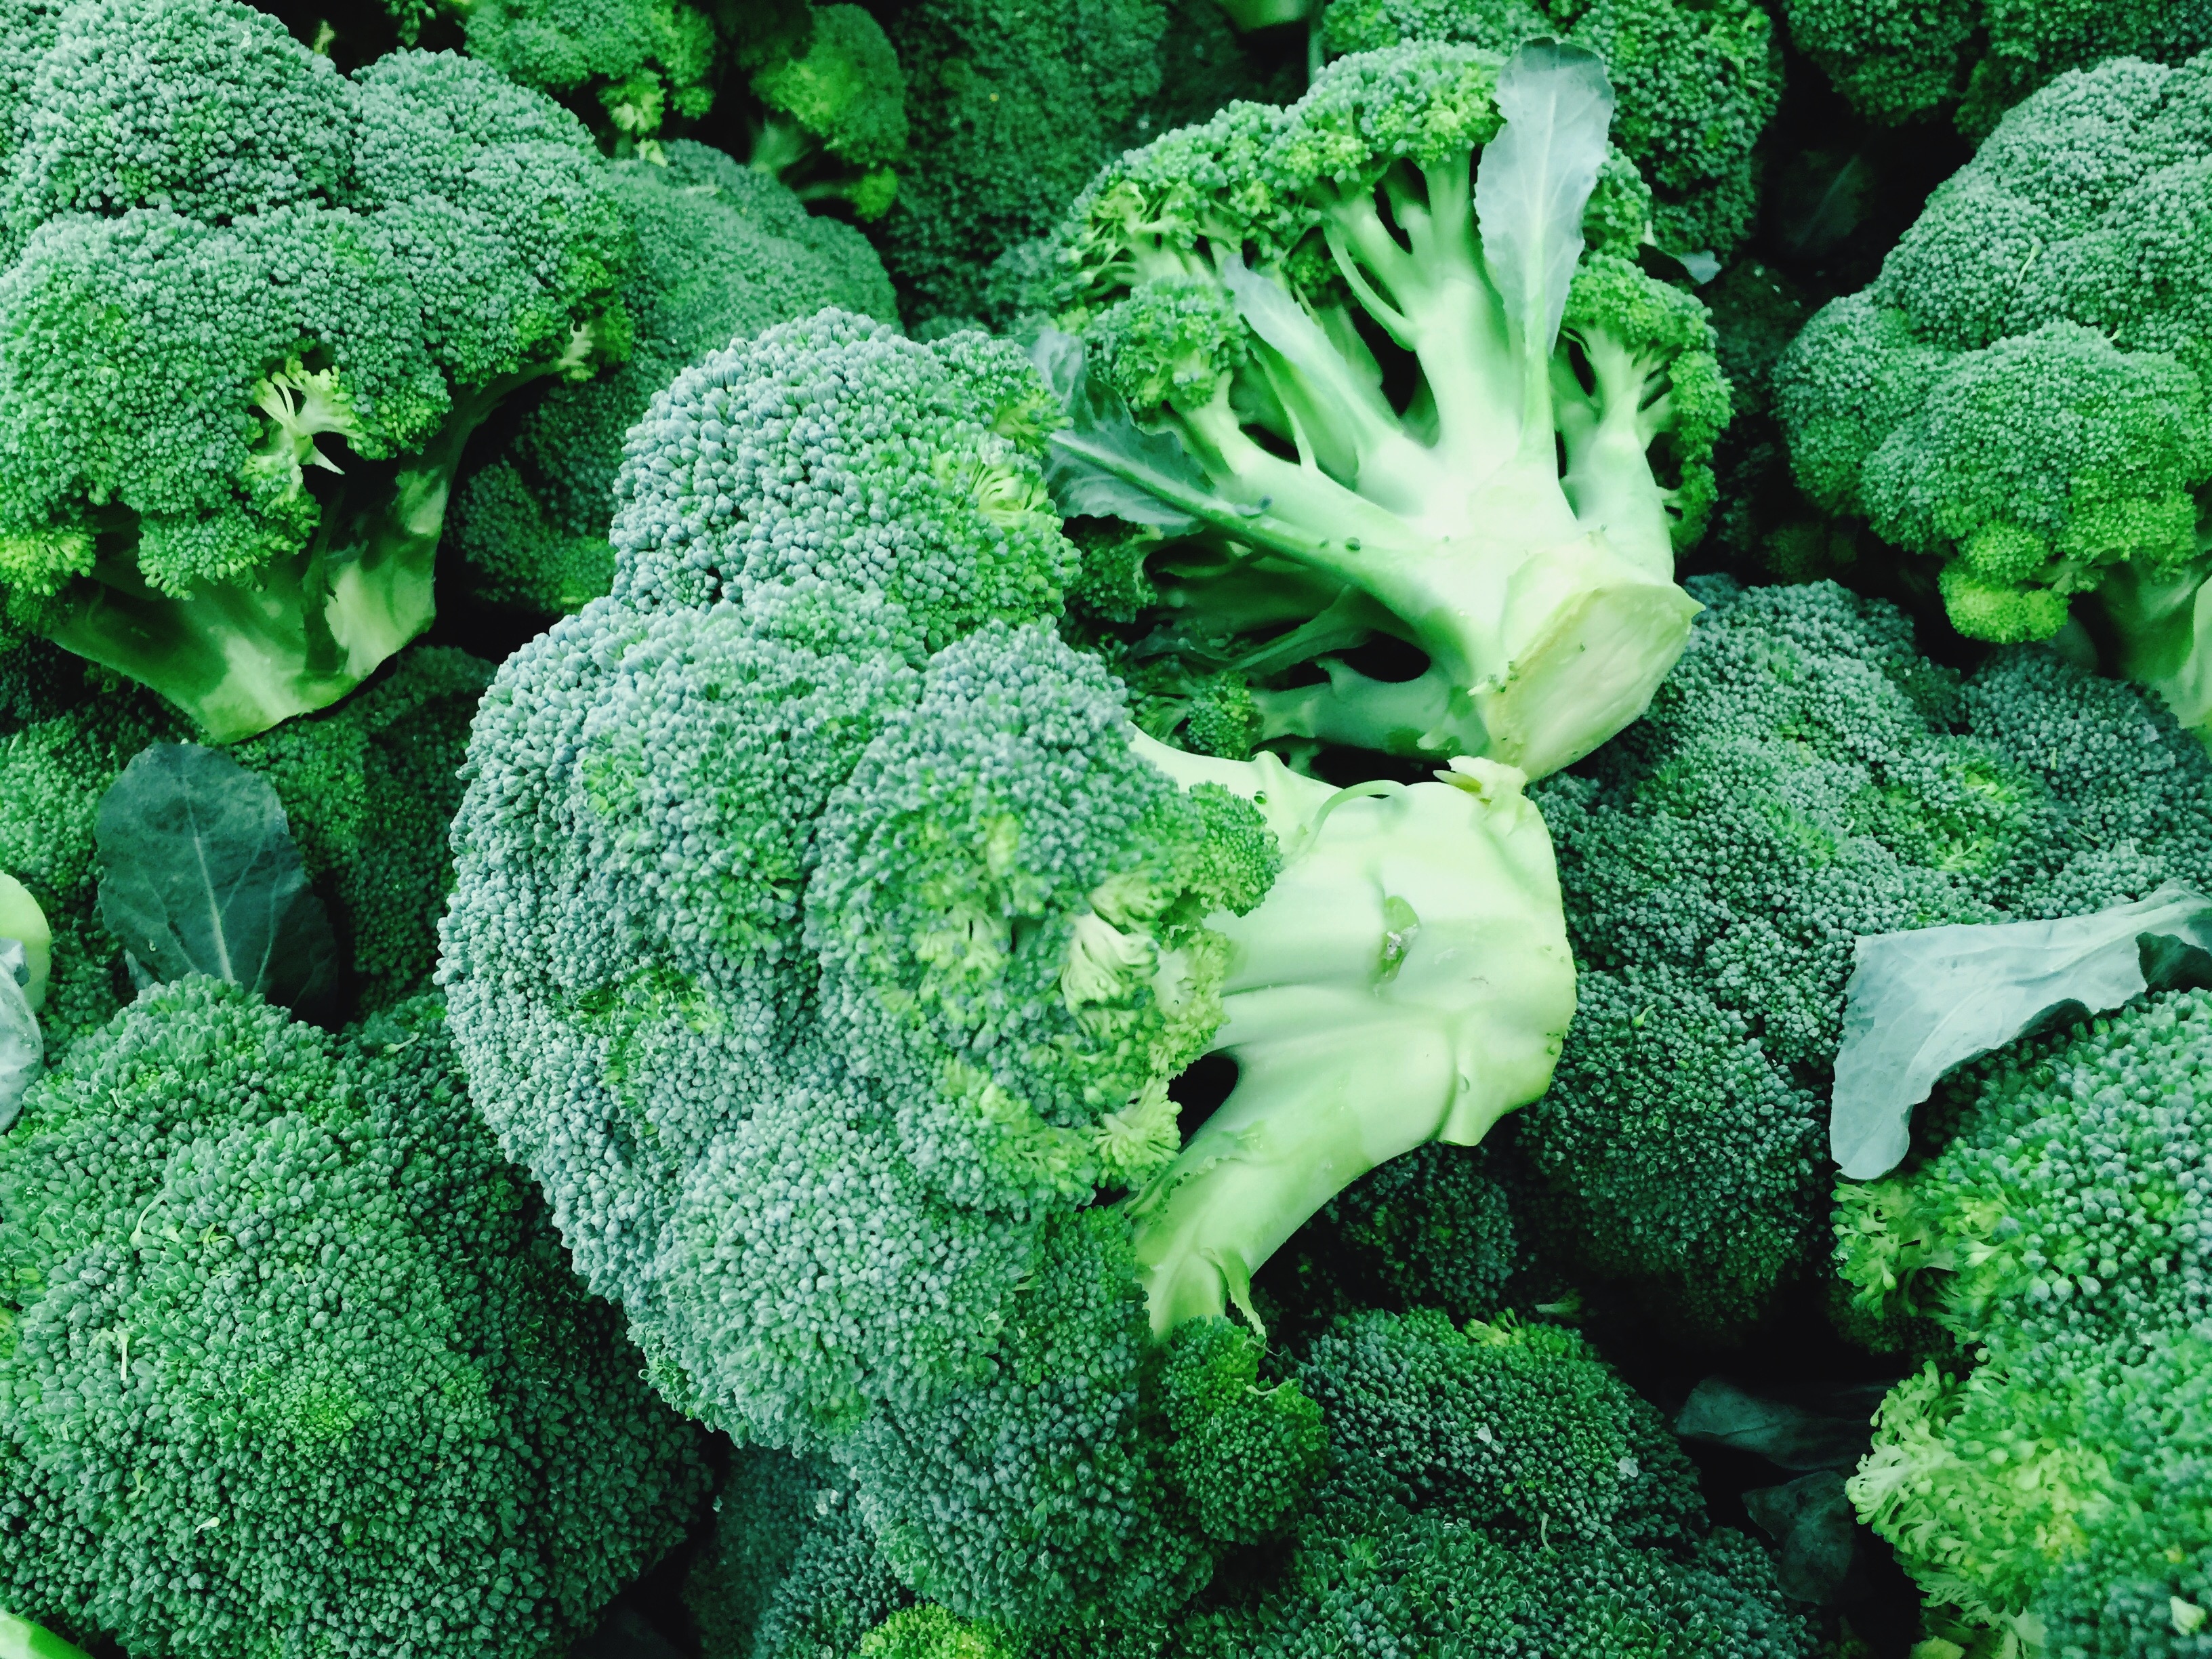 “Many brassicas sweeten after experiencing a frost, so now’s the time for them,” says O’Brady.